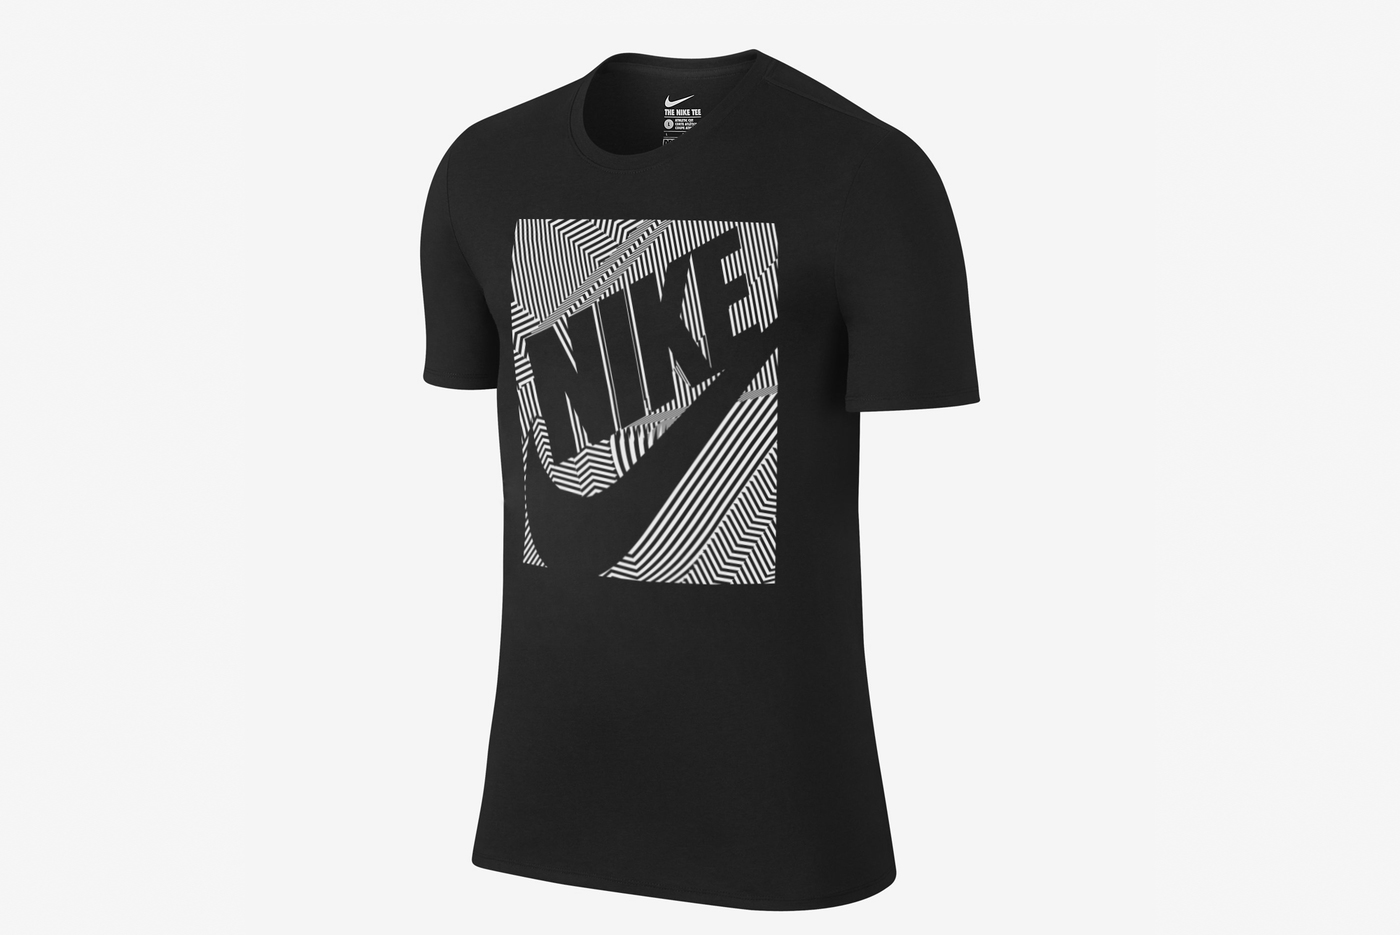 Nike SS16 T-shirts - Fonts In Use